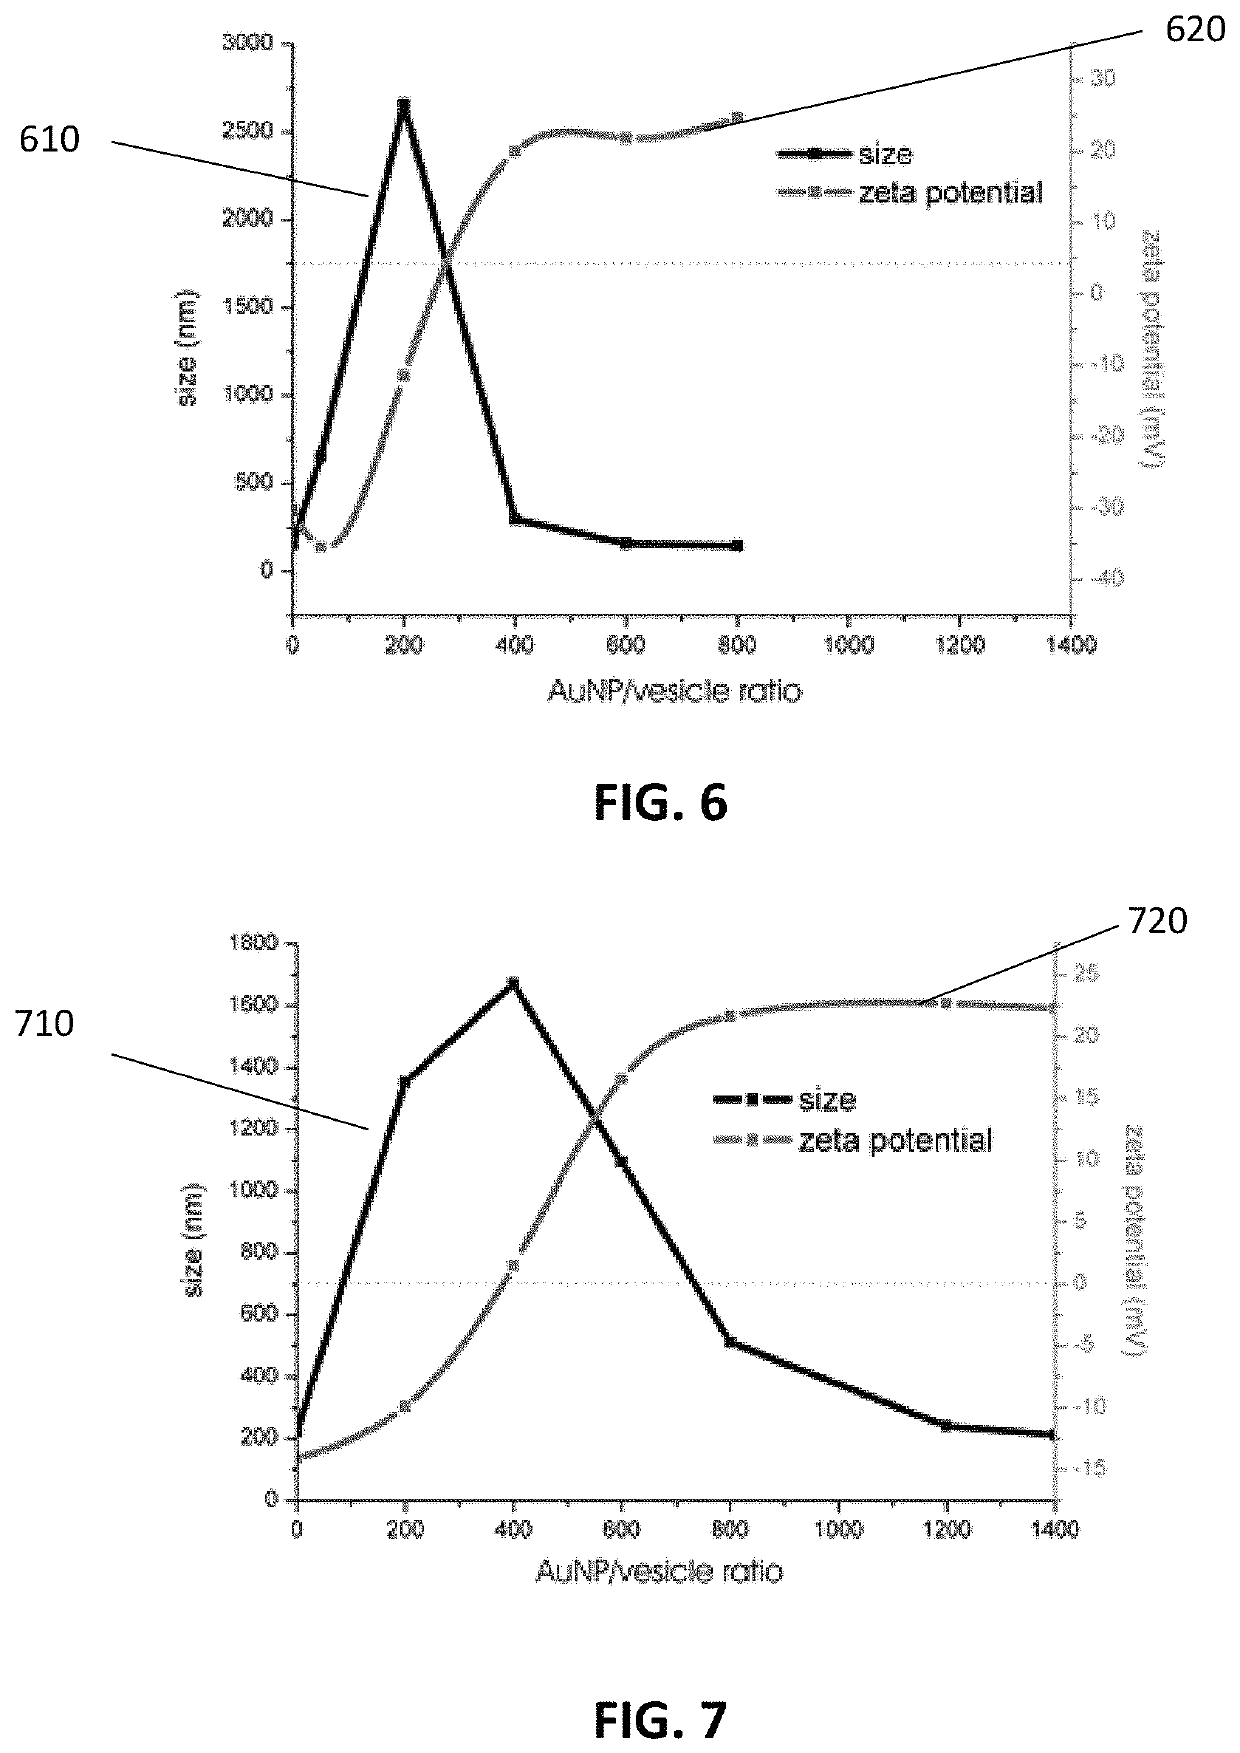 Method and system for characterizing extracellular vesicles